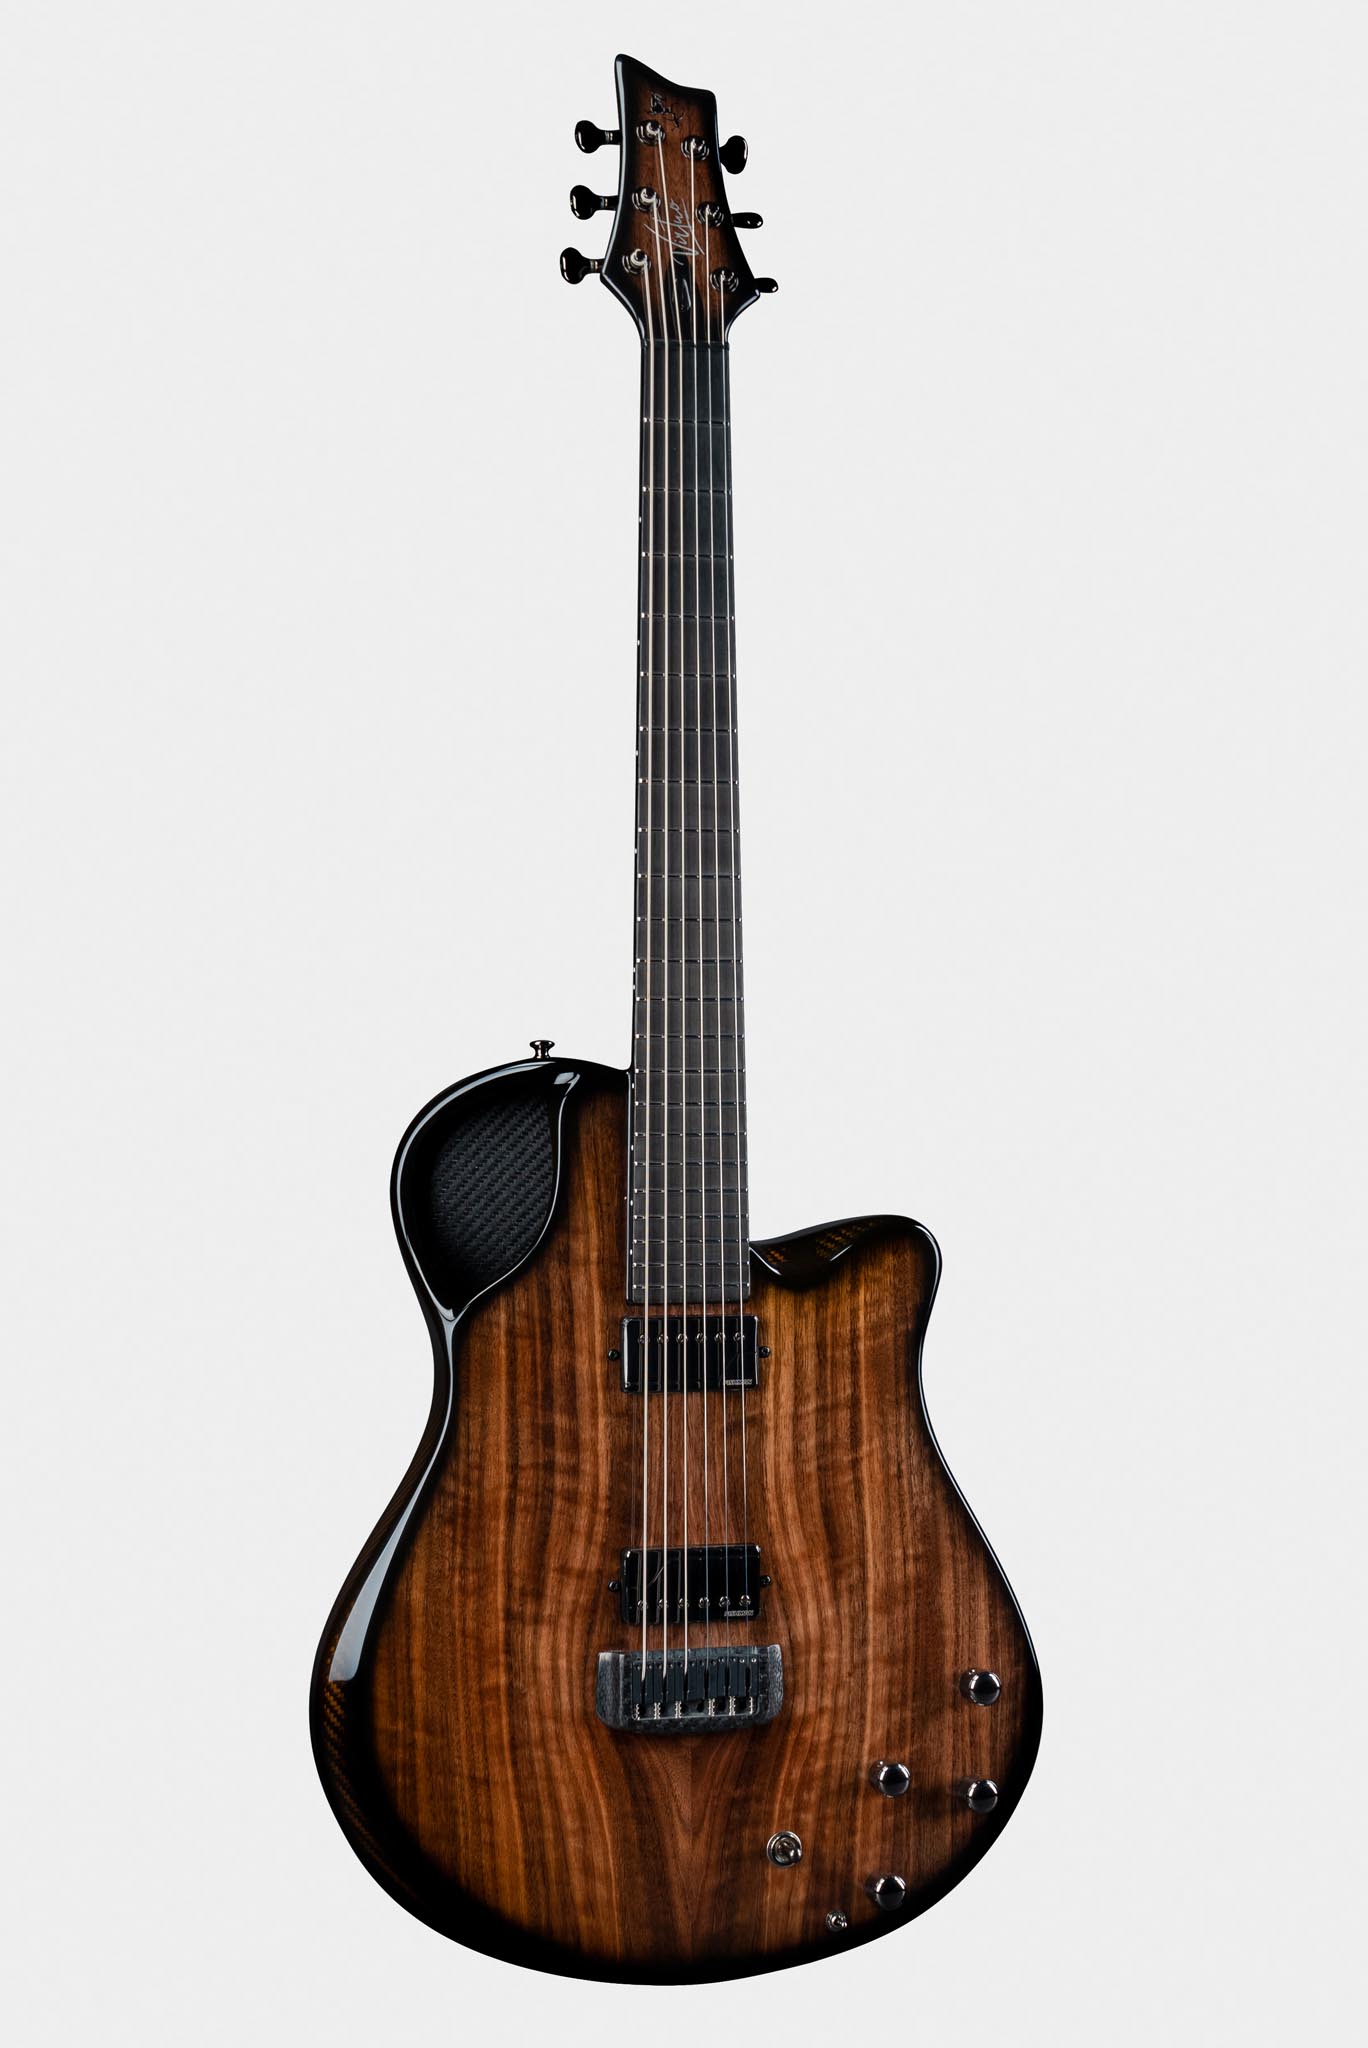 Virtuo Guitar with American Walnut Finish